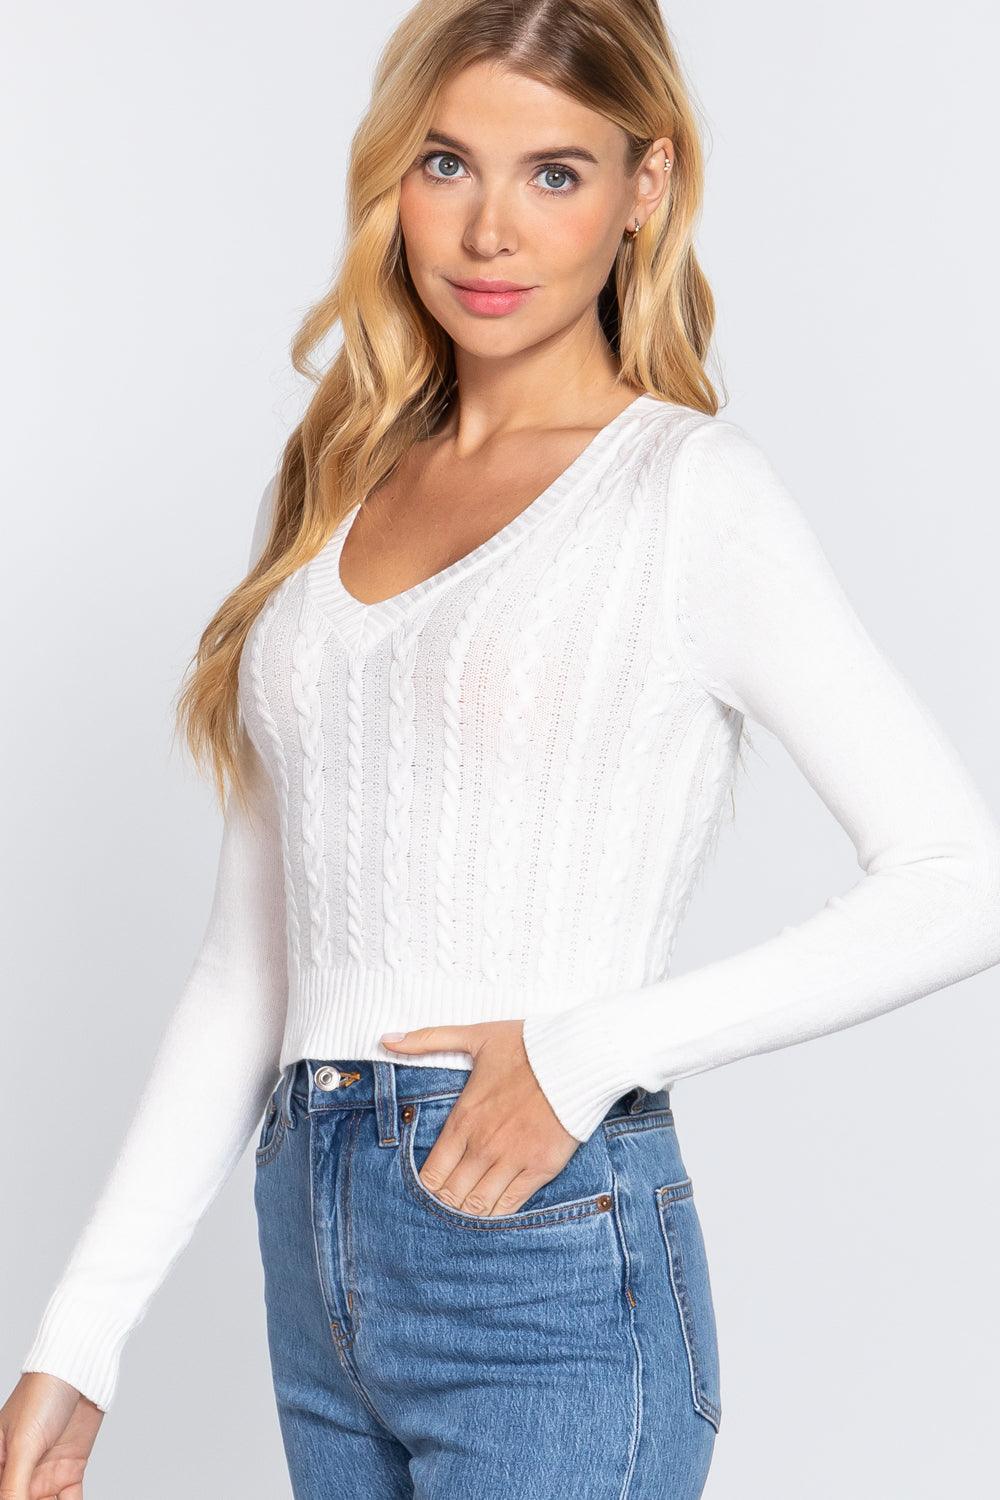 Long Sleeve V-neck Cable Sweater Naughty Smile Fashion